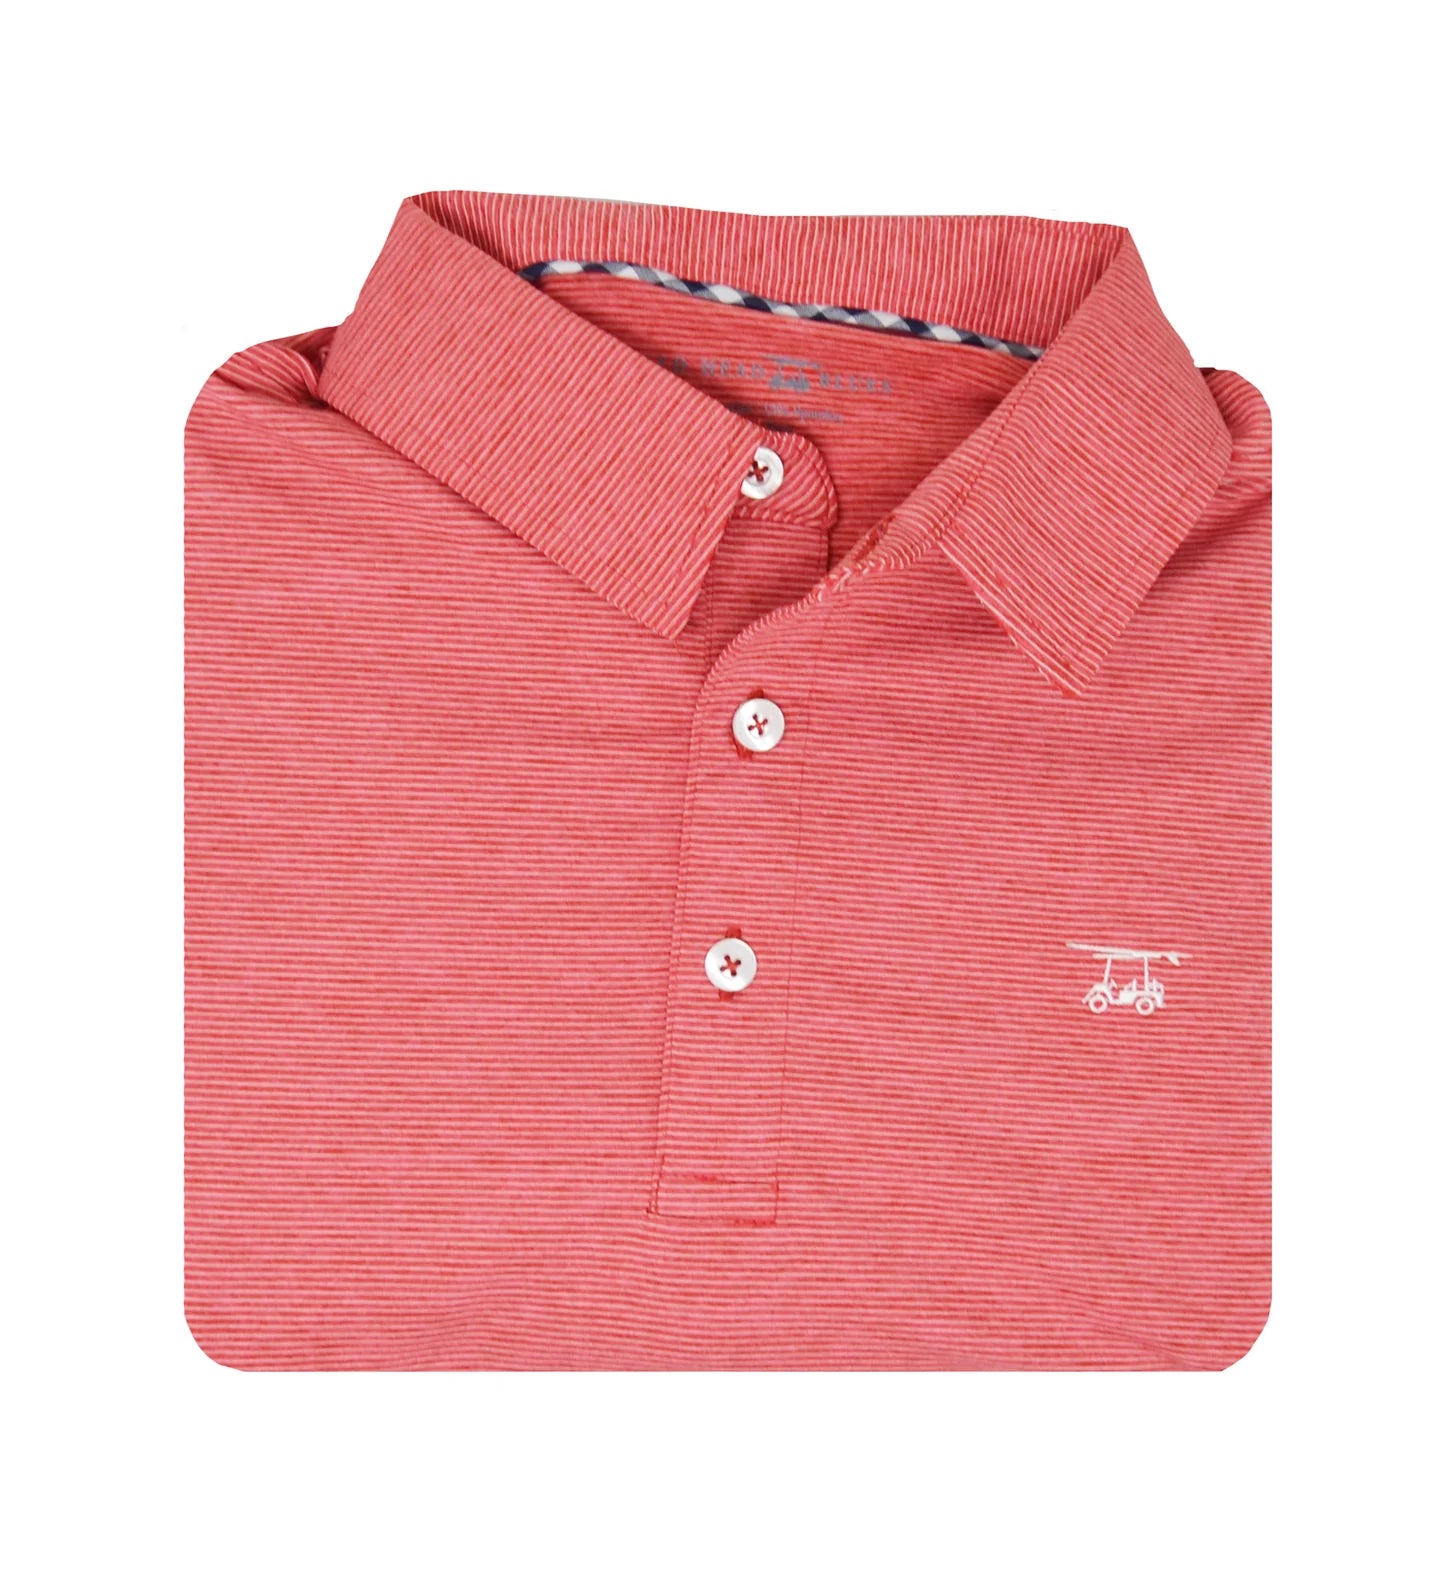 Limited edition polo-Heather RED/thin white-PALBATROSS-LE6-HRTW-Baldhead blues